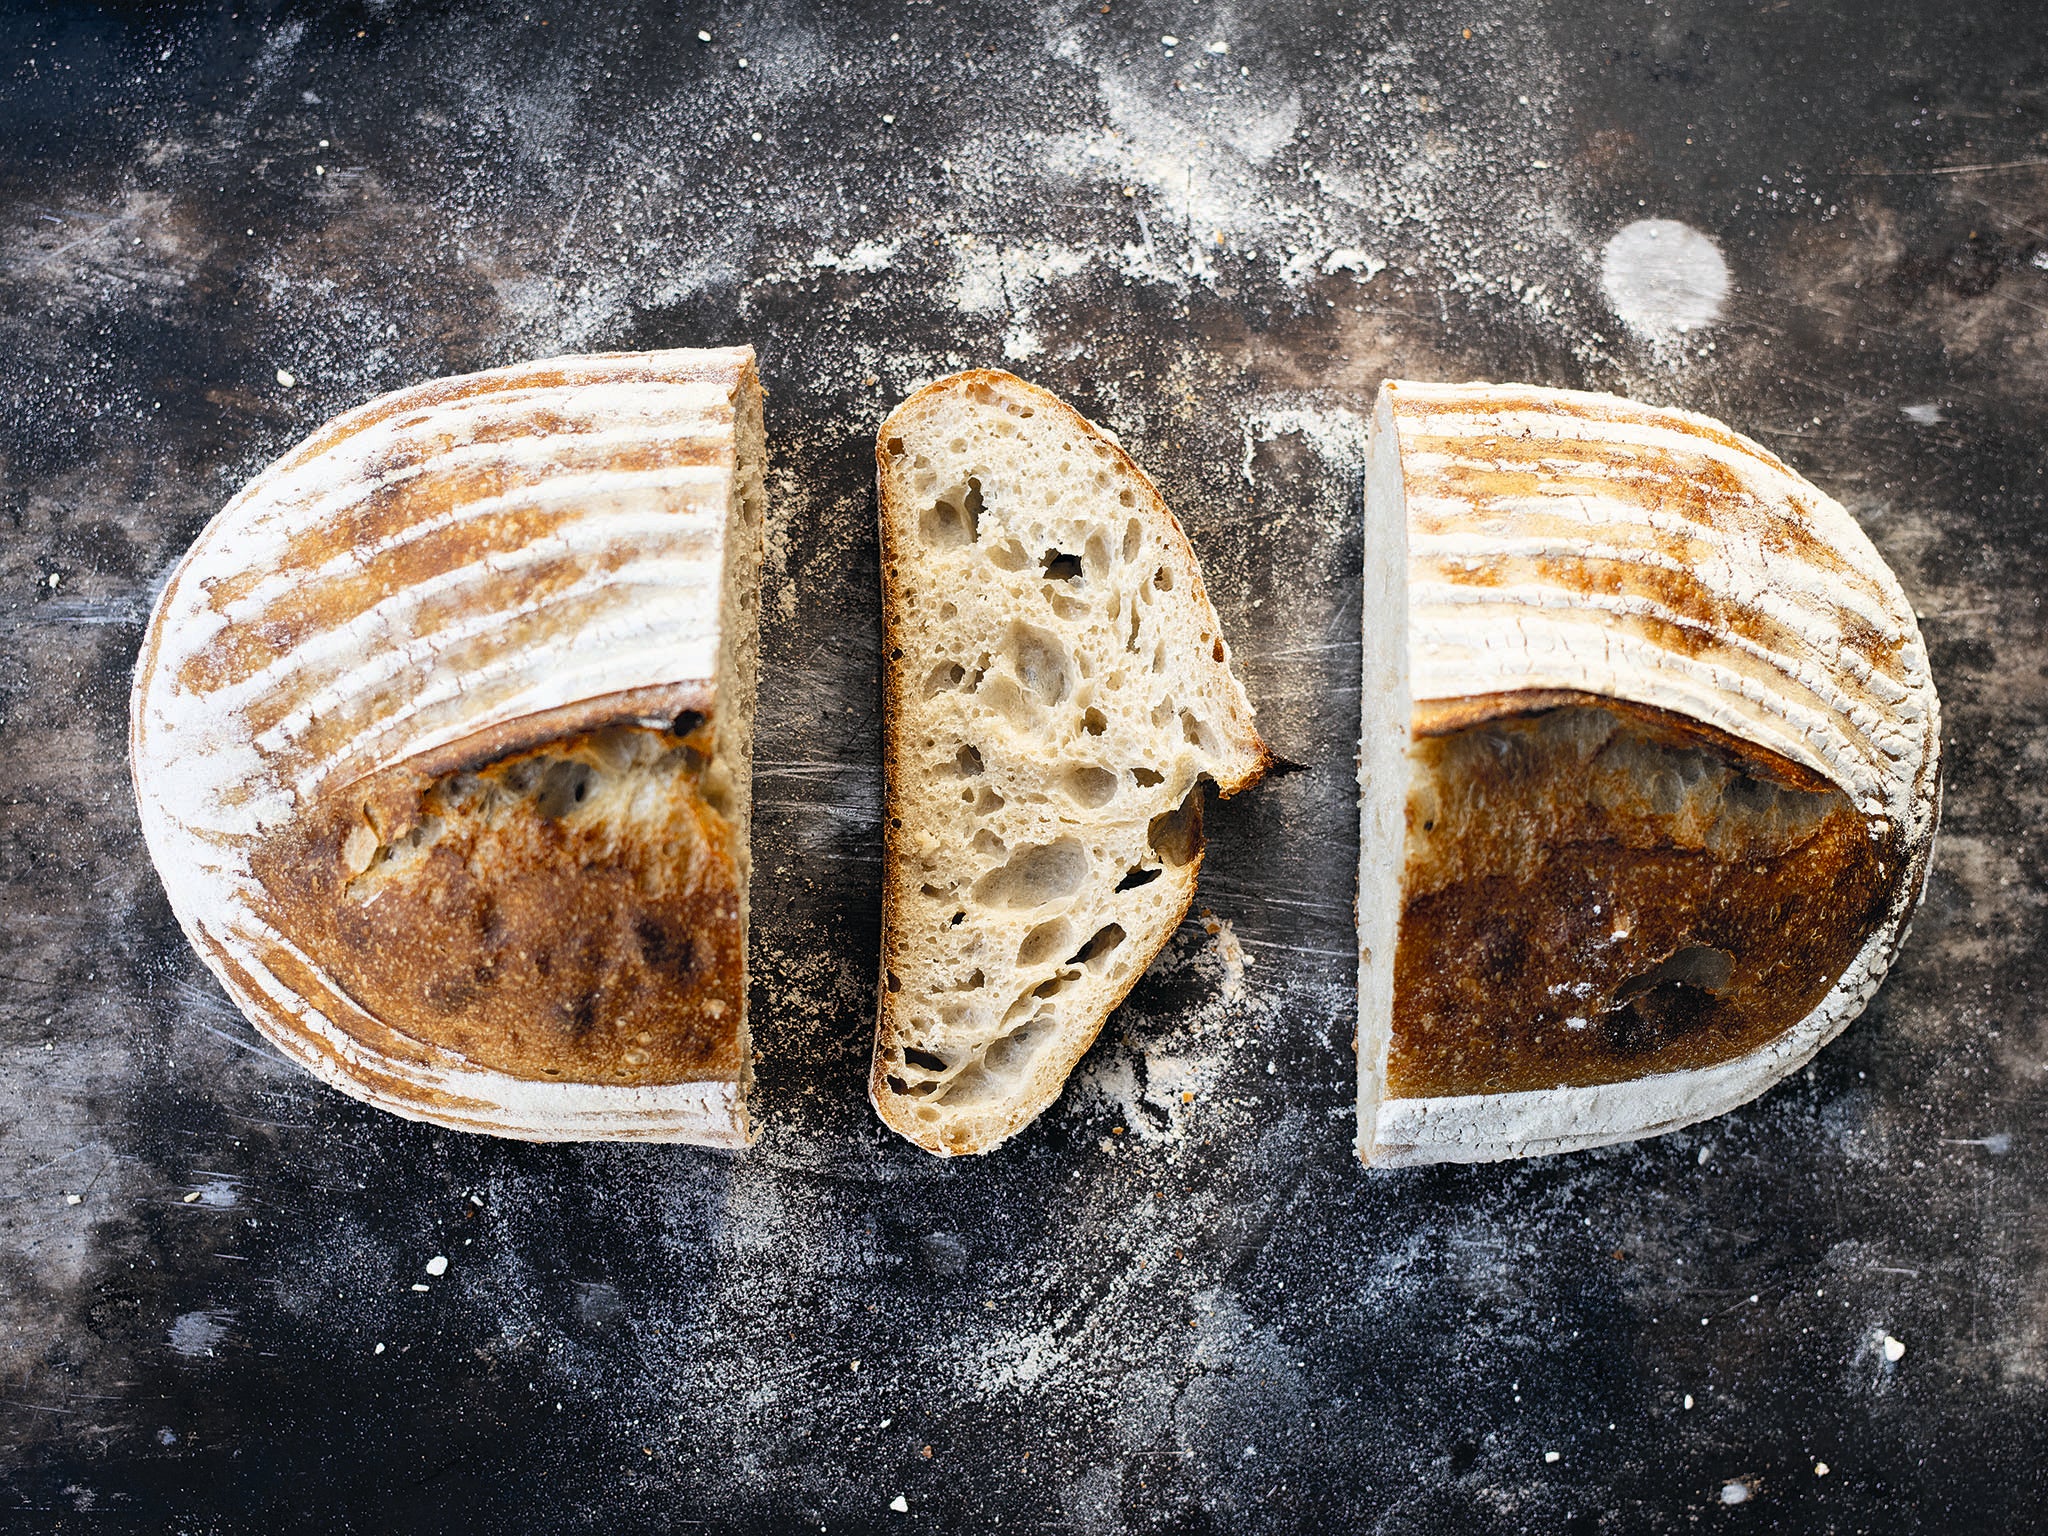 A sourdough culture is a living thing – it will bear the marks of the world around it